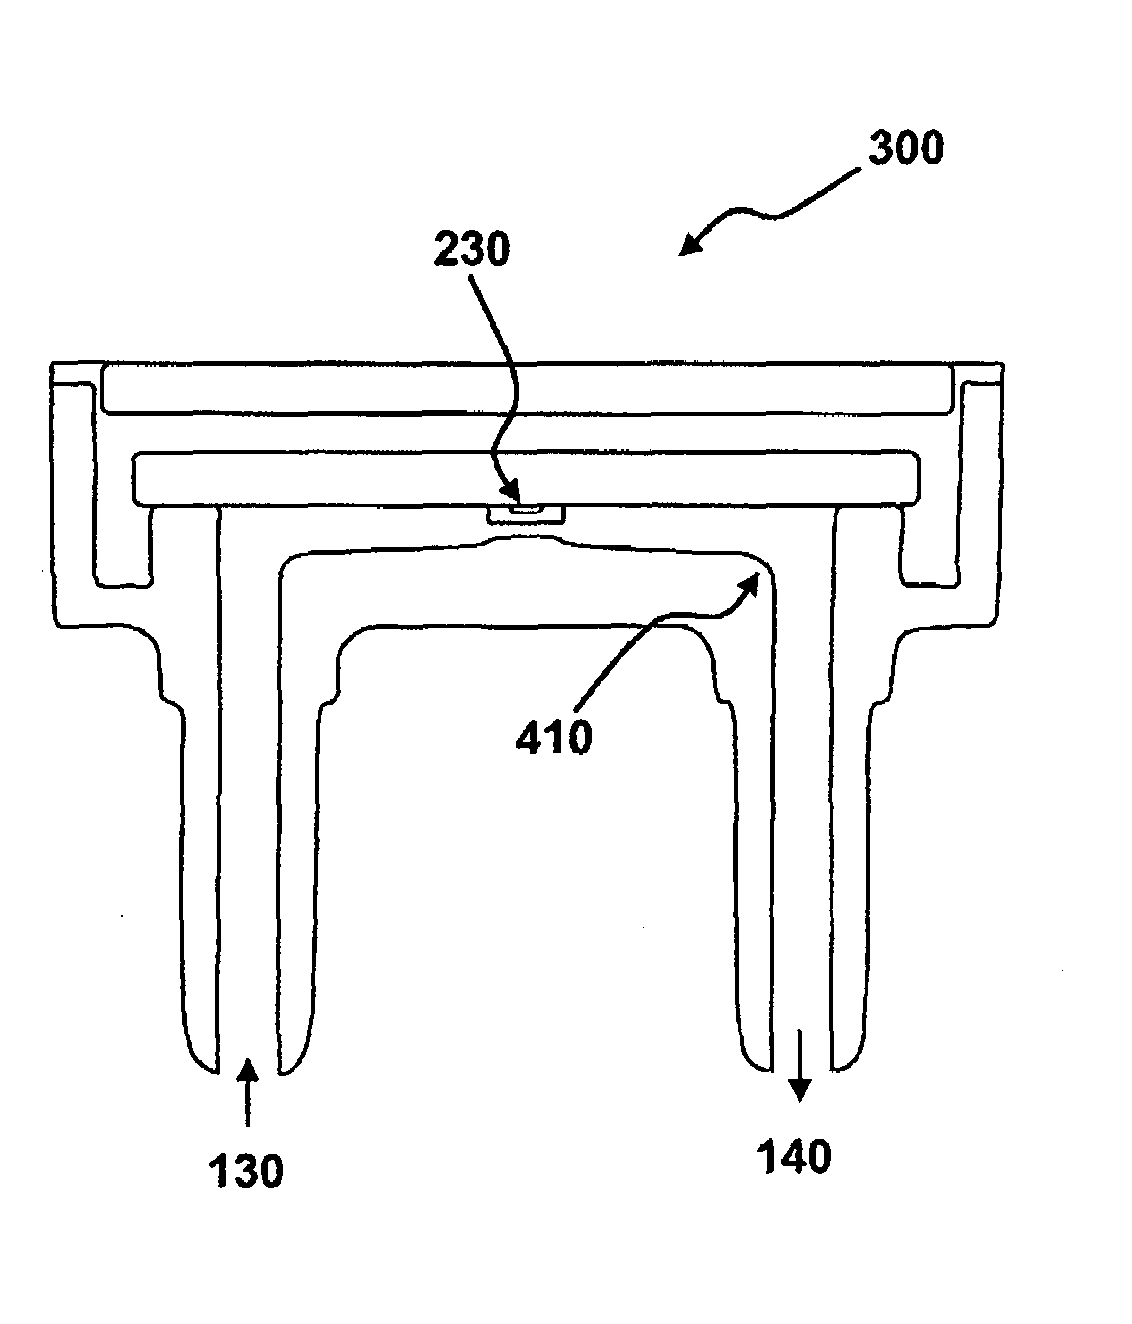 Flow sensing device including a tapered flow channel